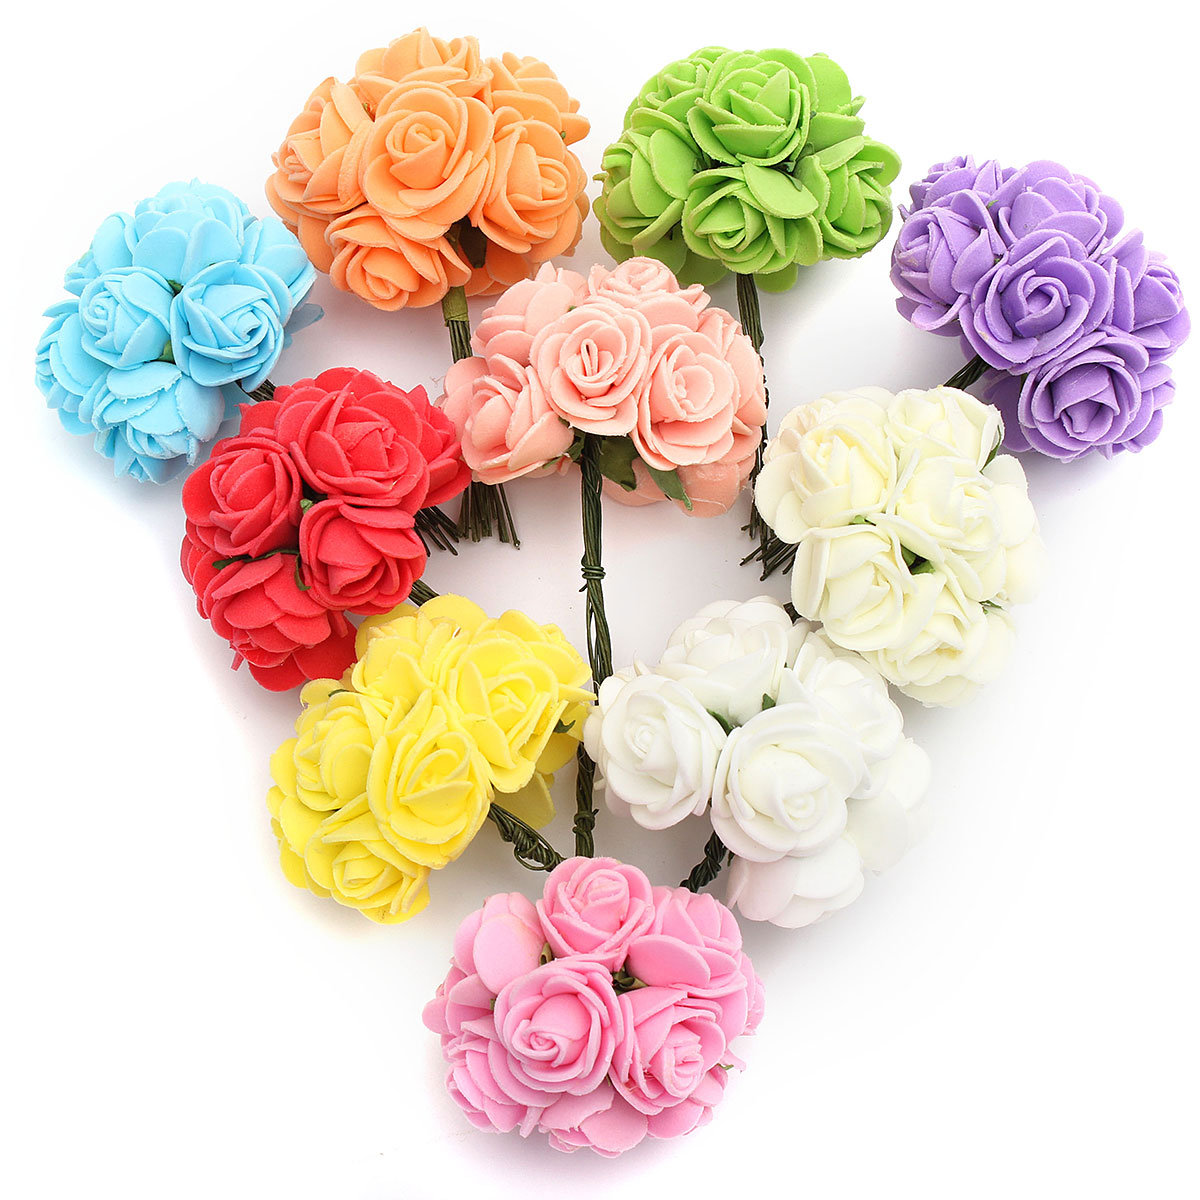 

12PCS Bride Bouquet Paper Rose Flowers With Wire Stems Wedding Home Party Decoration, White purple light pink orange yellow green blue red pink